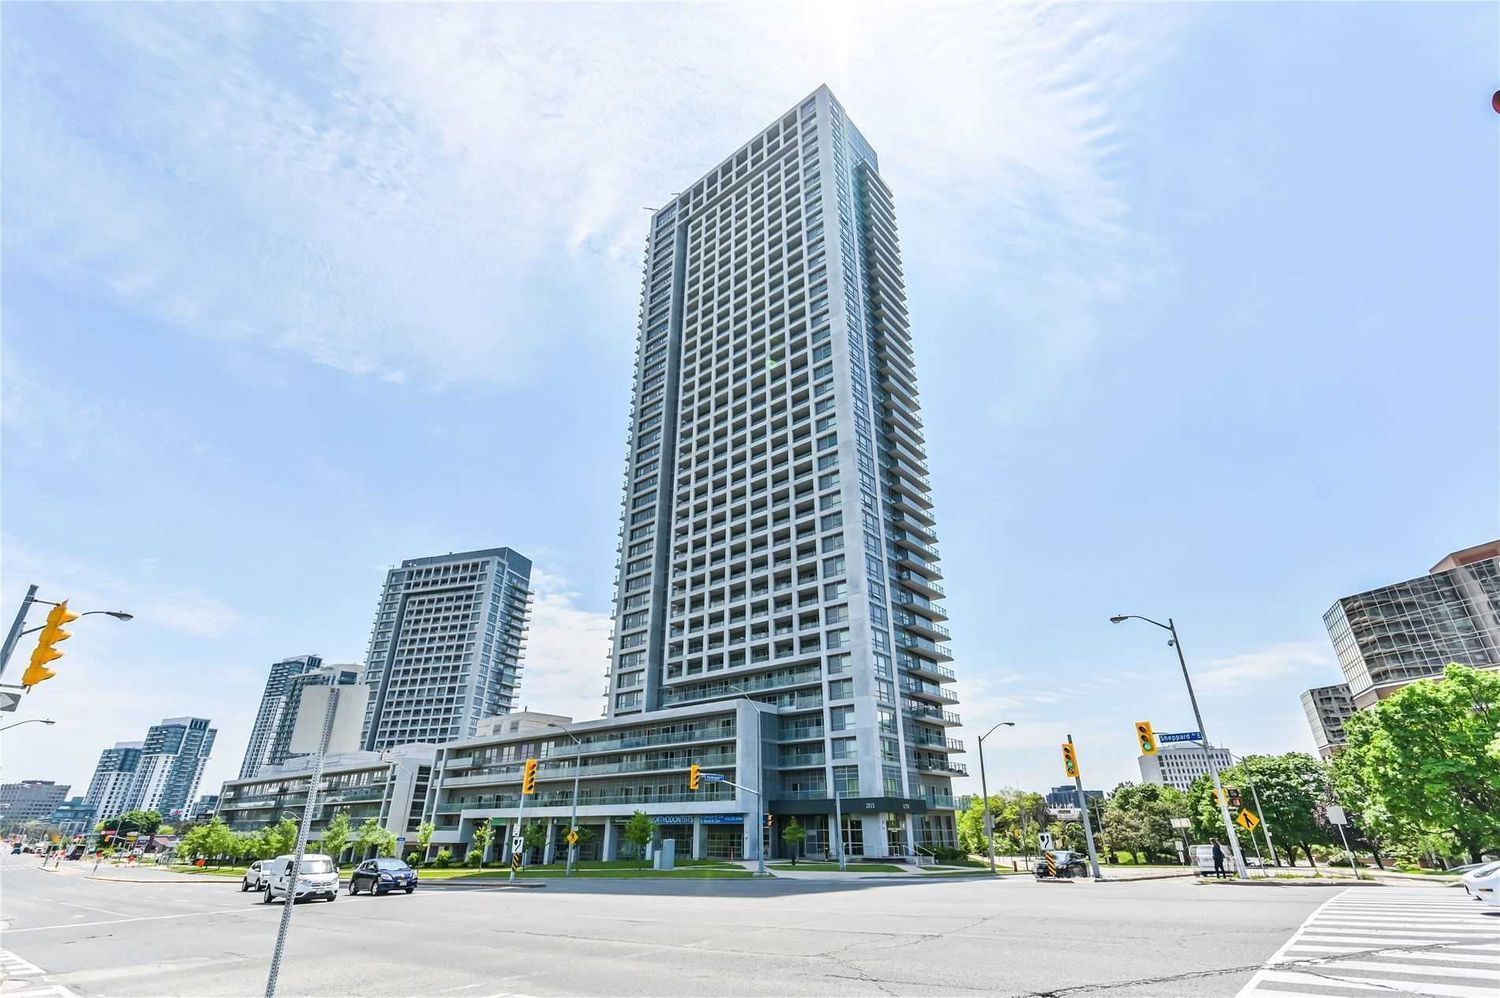 2015 Sheppard Avenue E. Ultra at Herons Hill Condos is located in  North York, Toronto - image #1 of 2